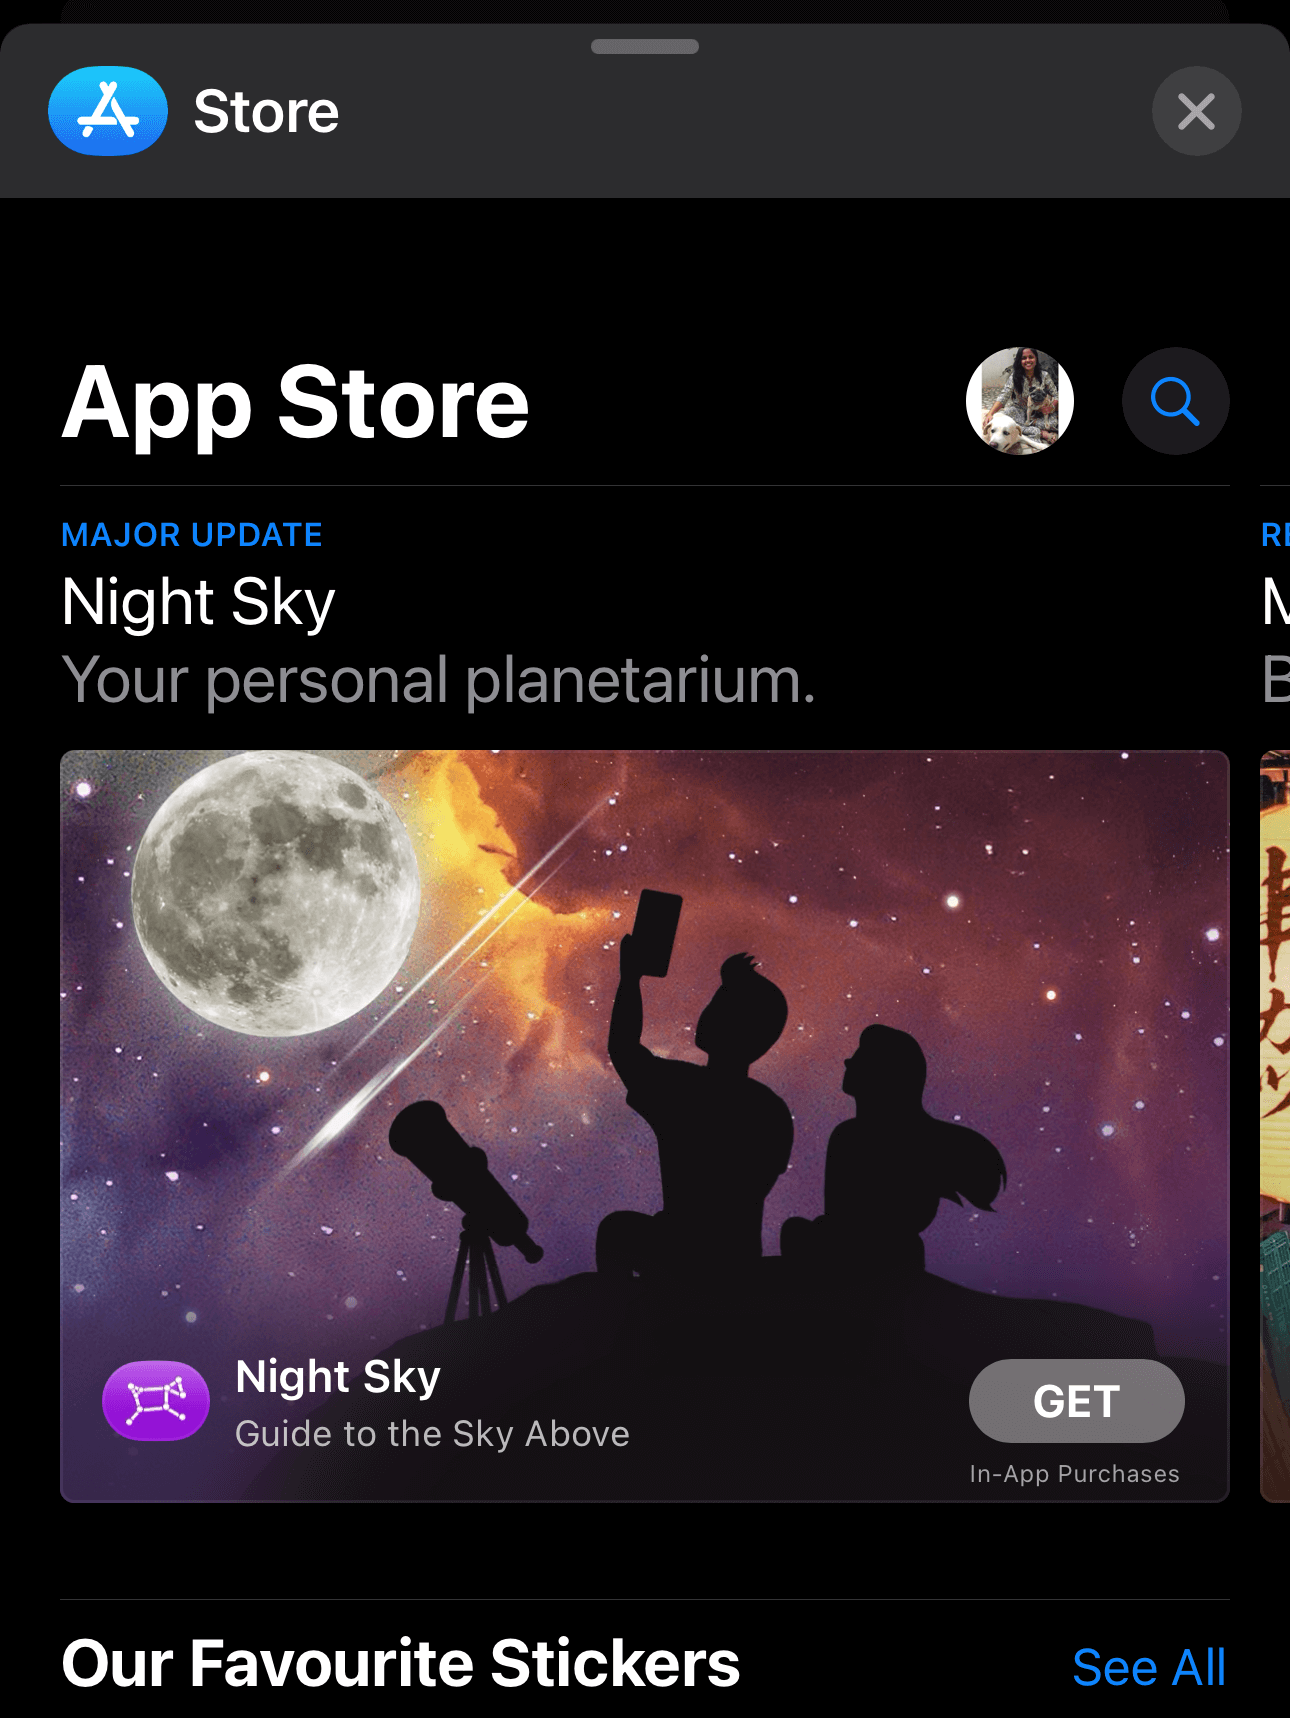 App Store Home page within iMessage app